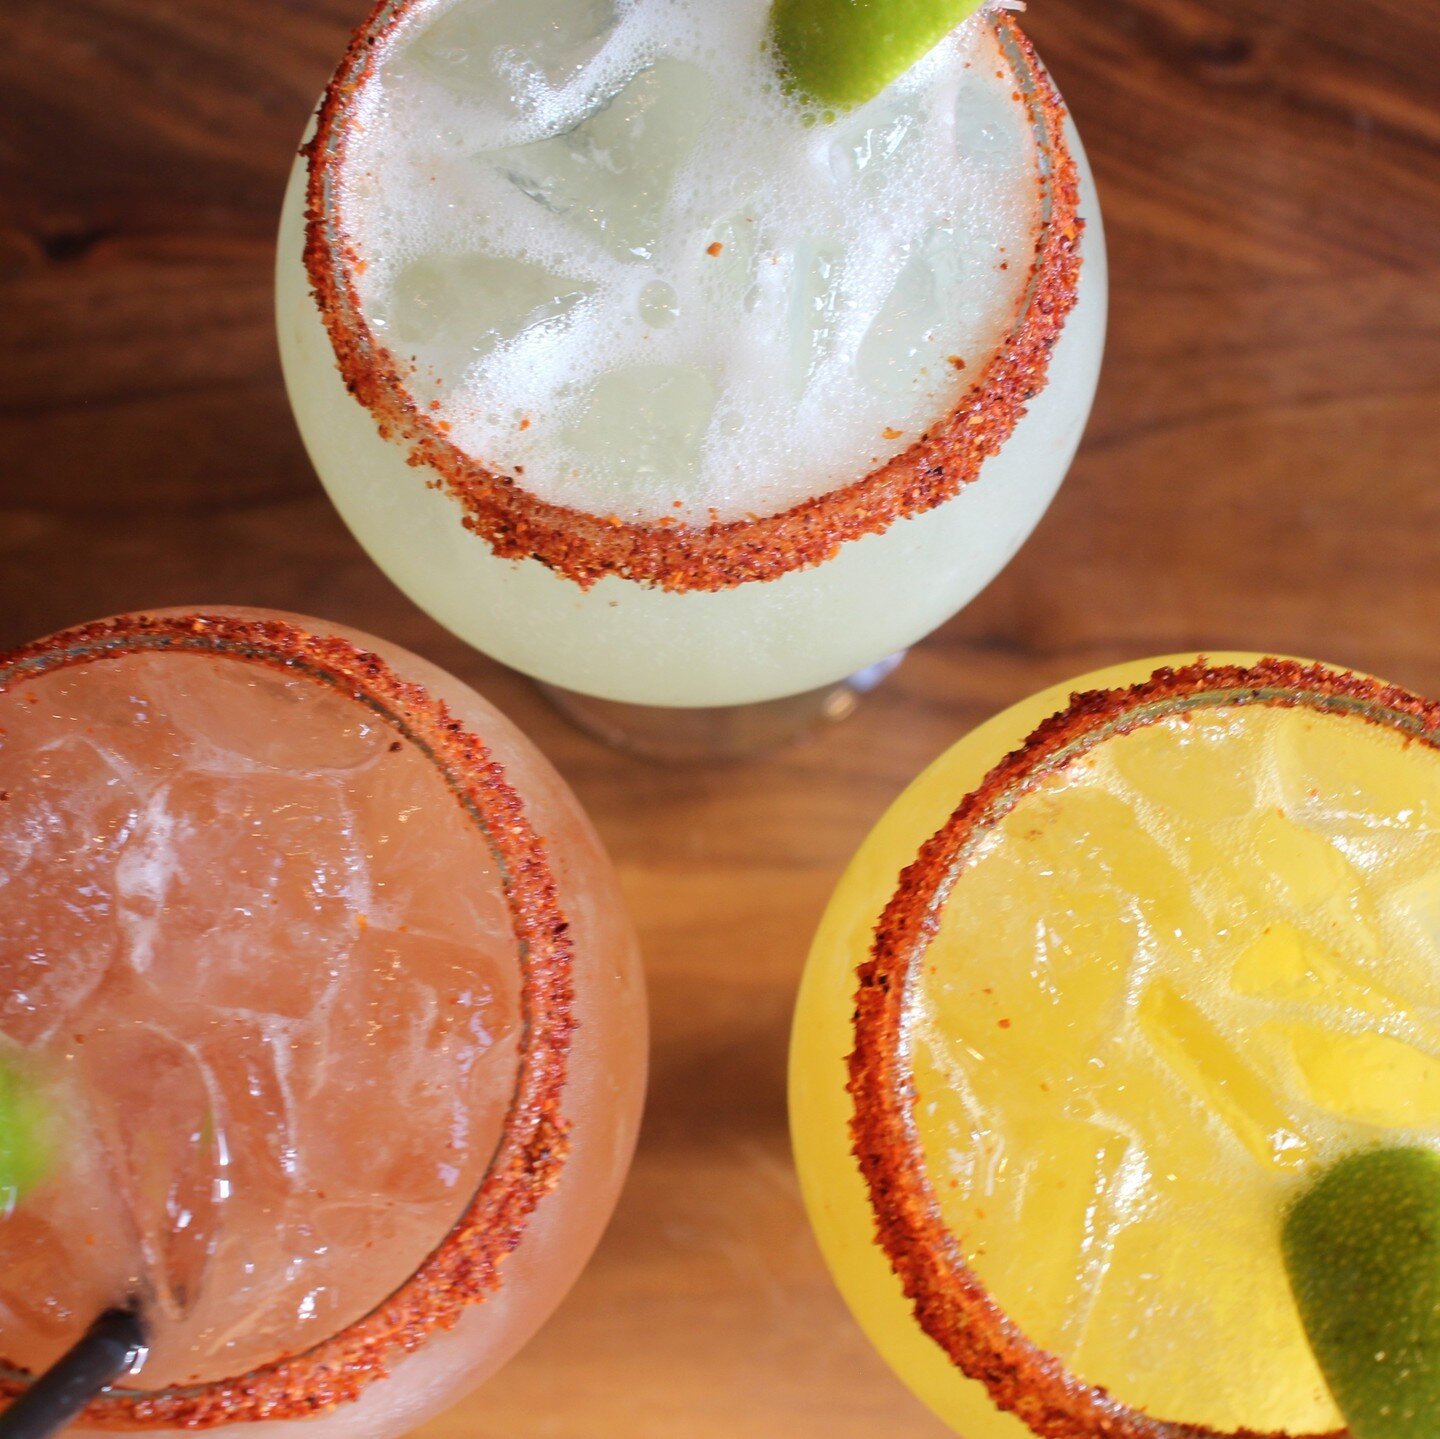 Celebrate Cinco de Mayo with a shot of tequila and a touch of tajin at El Mirasol! 🍹 From fresh Tacos al Carbon to zesty guacamole, every bite is a celebration of Mexican flavors.